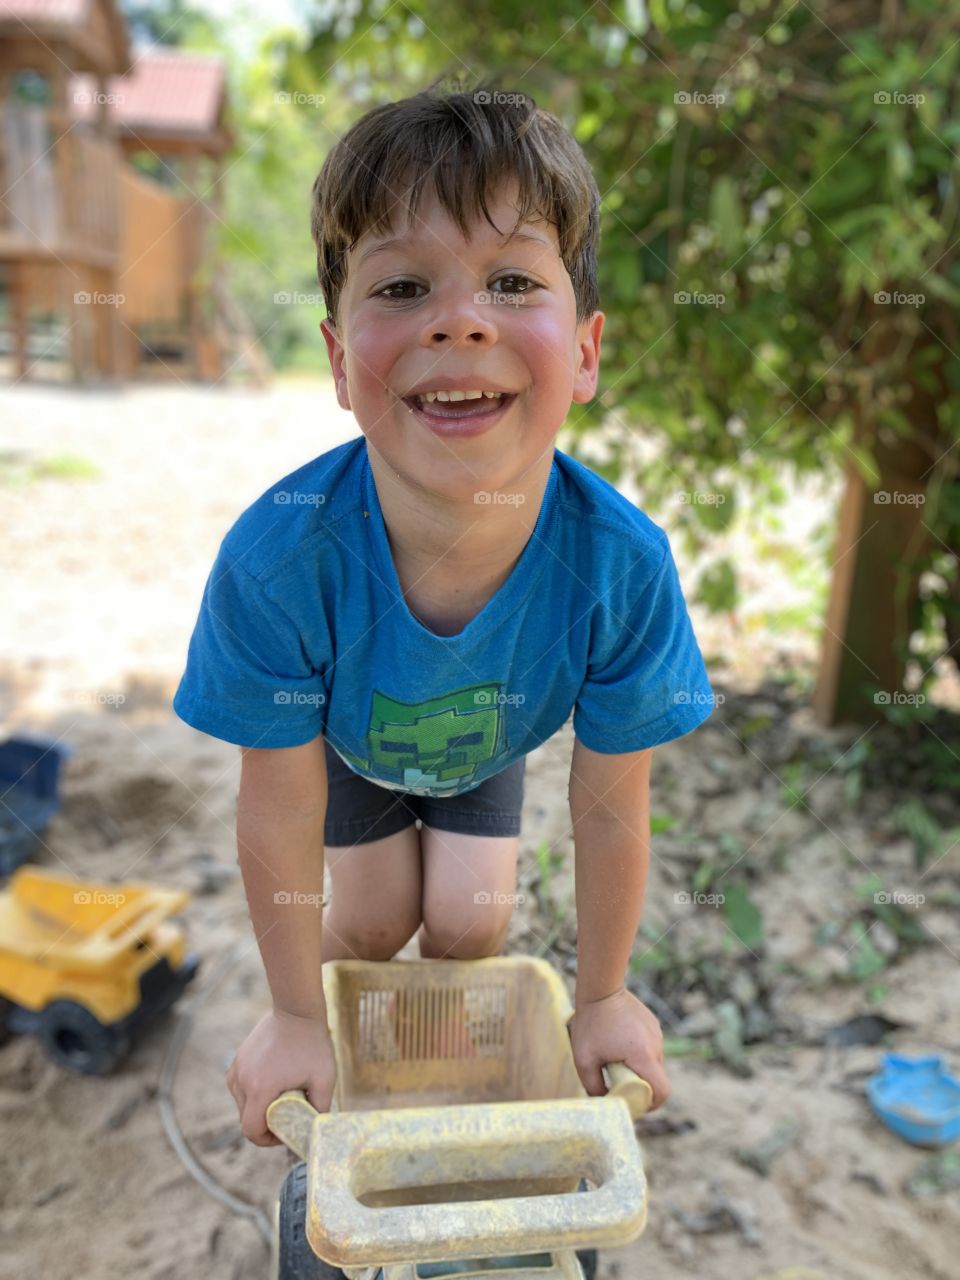 Sweaty, happy boy playing with a dump truck toy in a sandbox at a playground on a summer day.